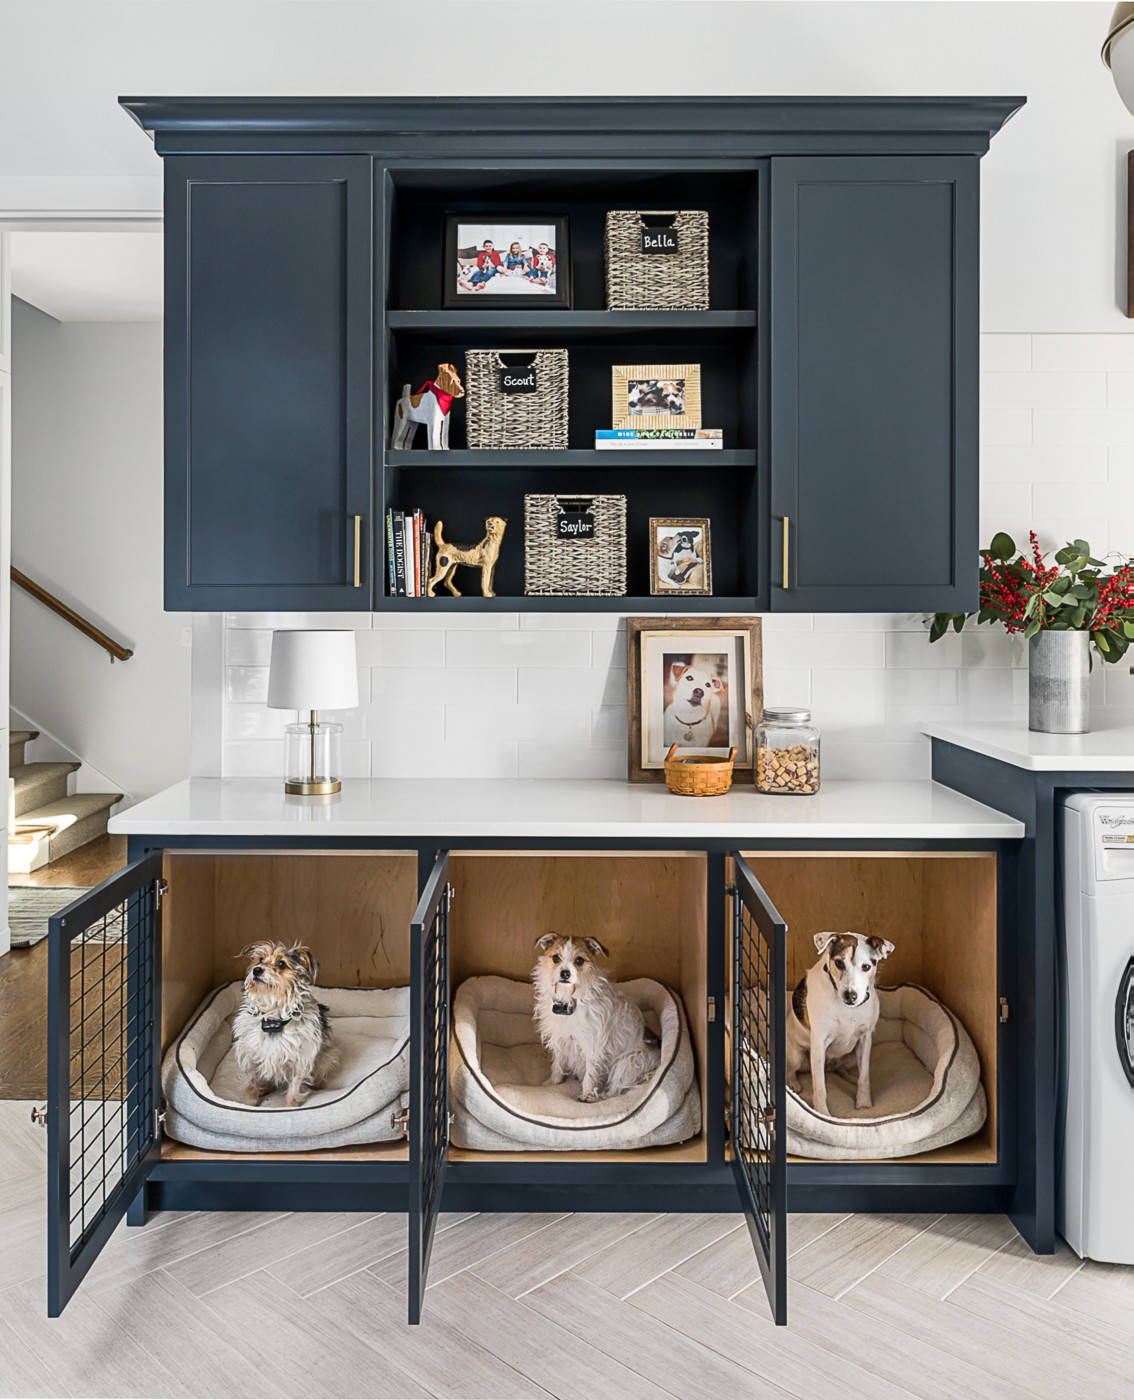 30+ laundry room decorating ideas for a functional and stylish space